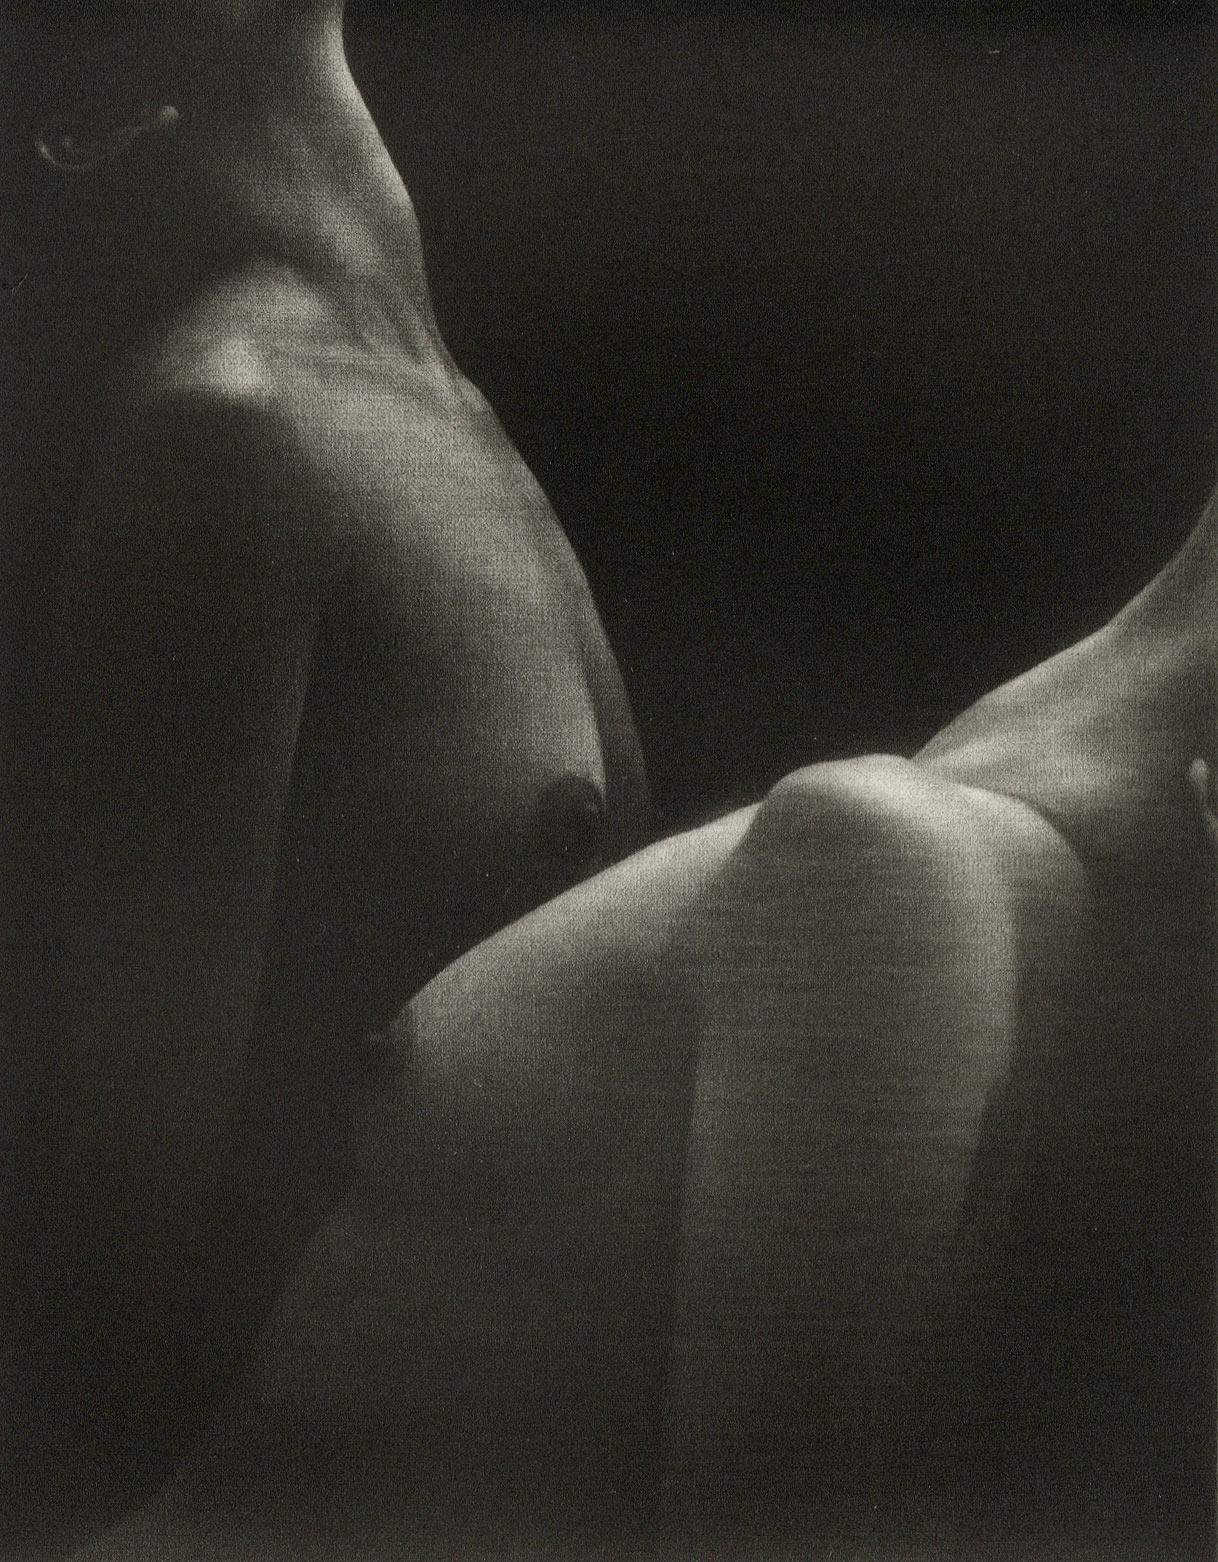 Mikio Watanabe Nude Prints - 15 For Sale at 1stDibs.